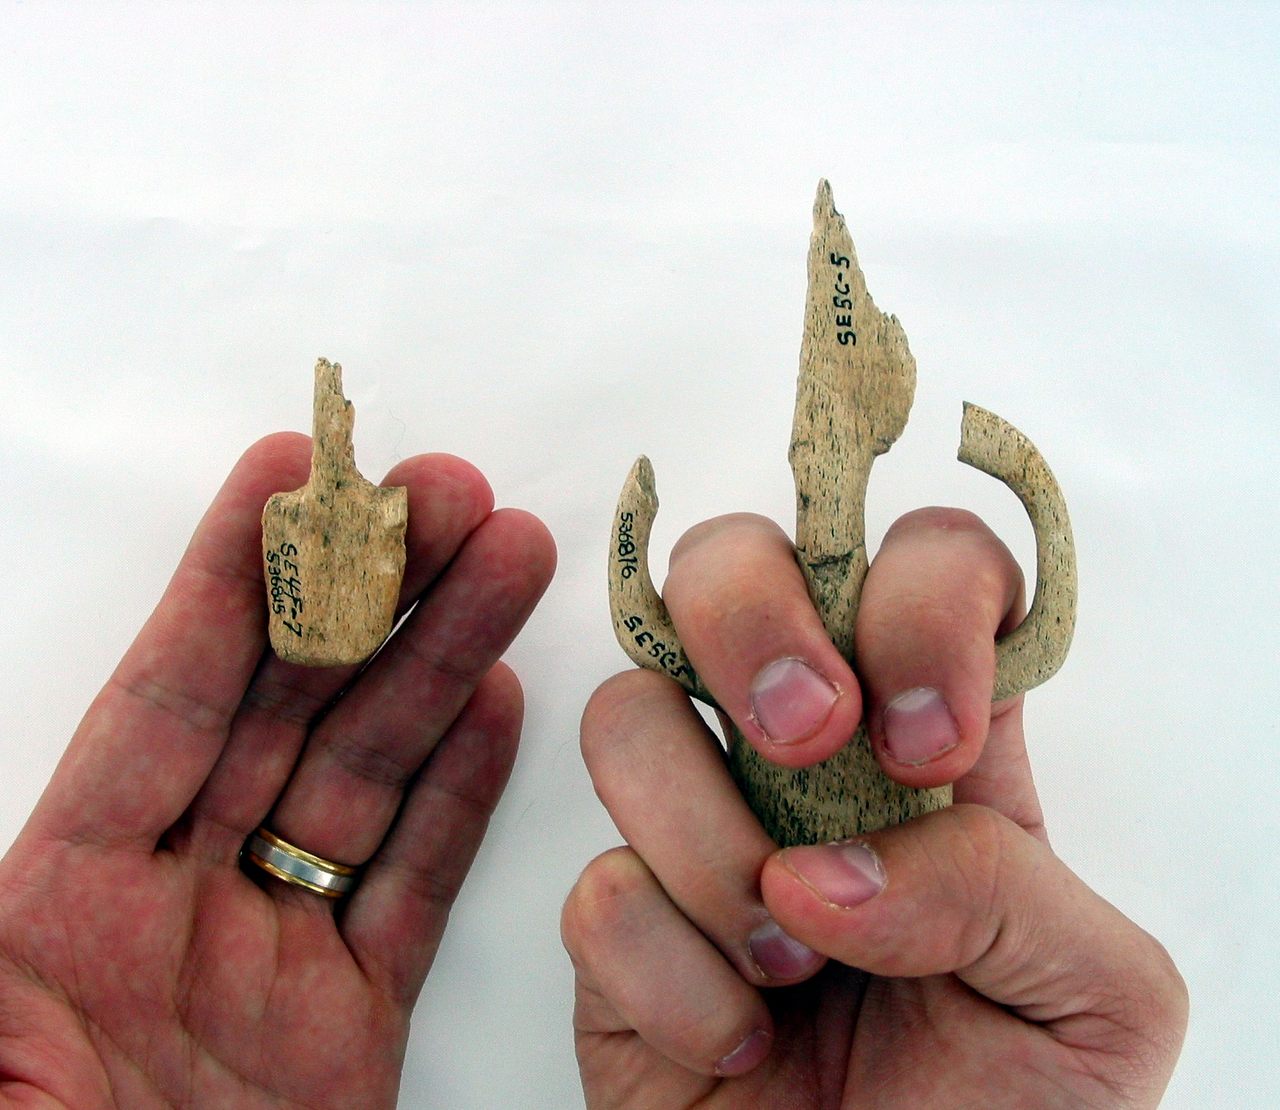 The atlatl fragment on the left might have been used by a child. The one on the right is full size. 